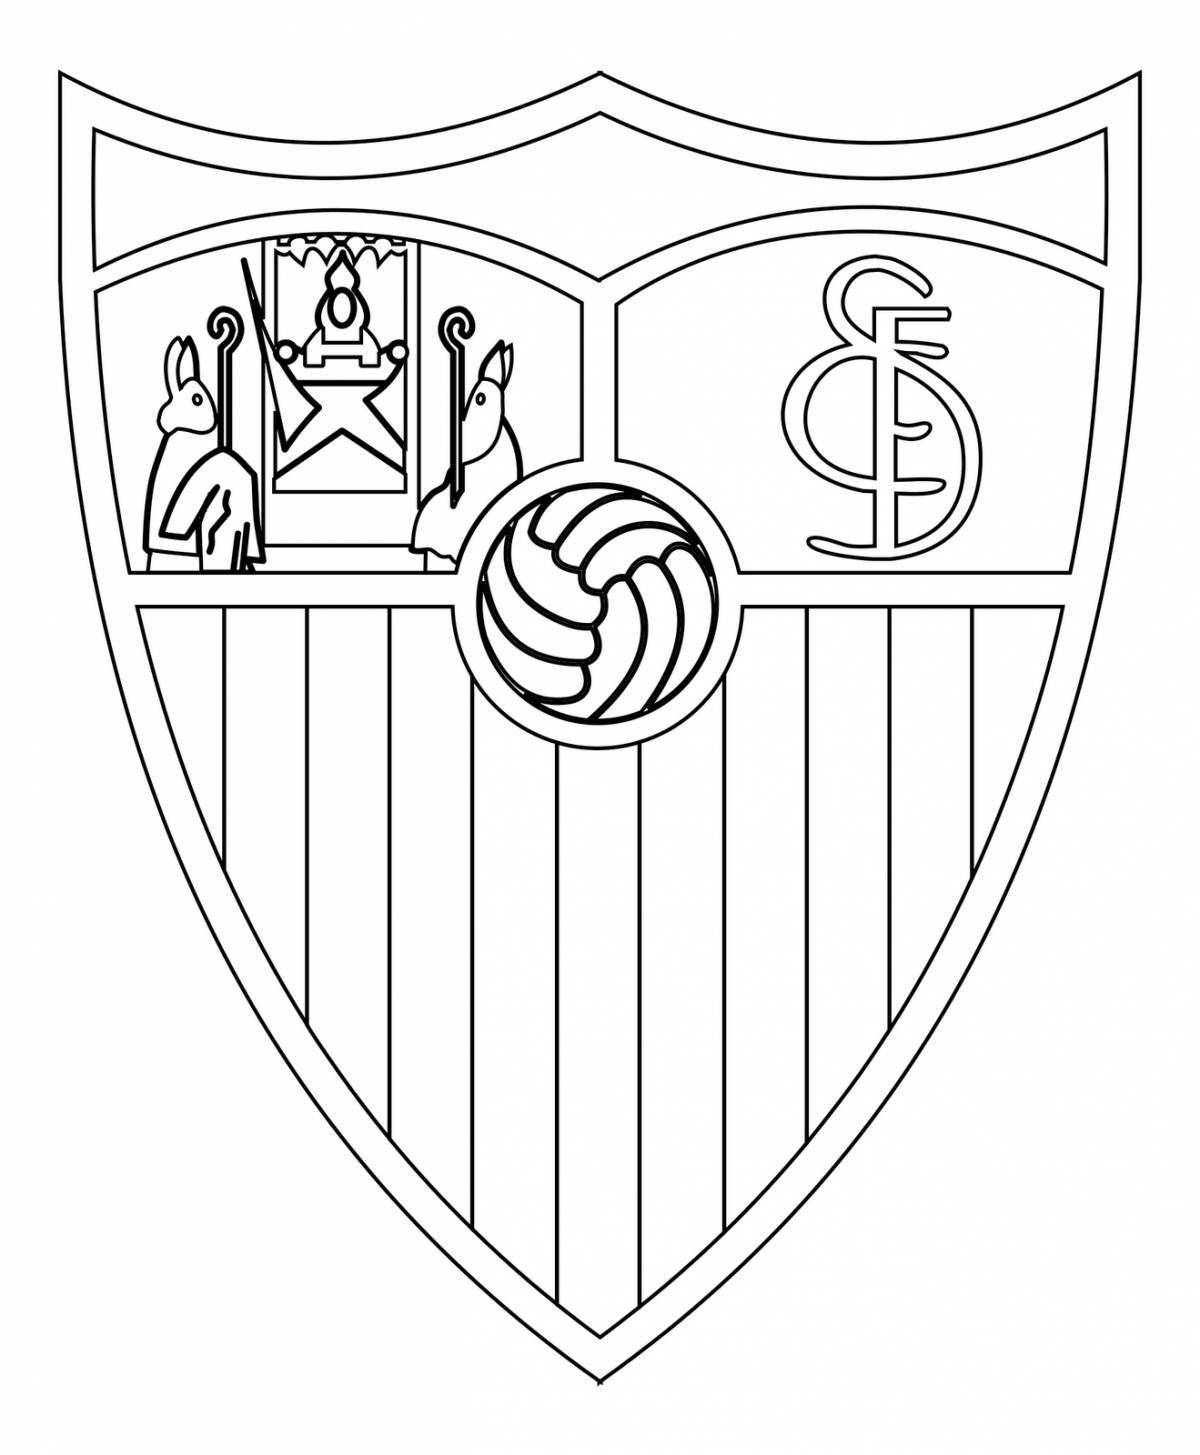 Football club emblems majestic coloring page